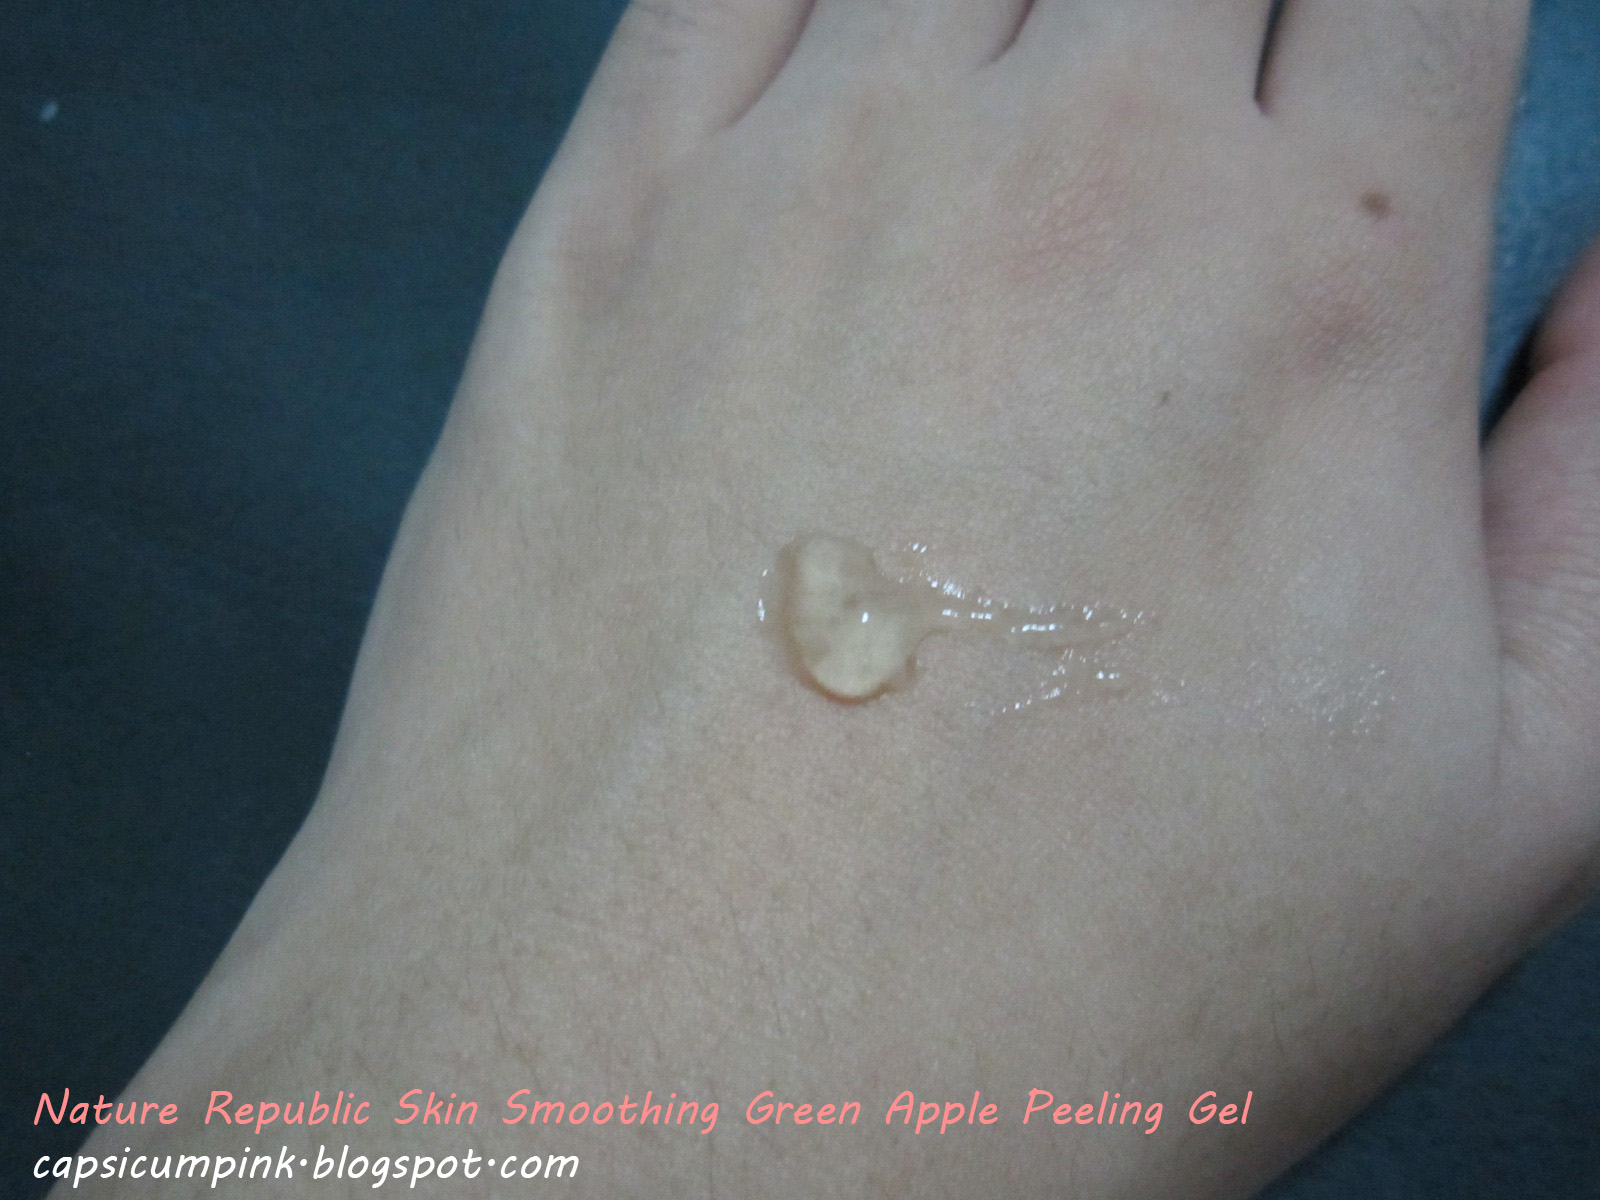 maru in circles: Review: Nature Republic Skin Smoothing ...